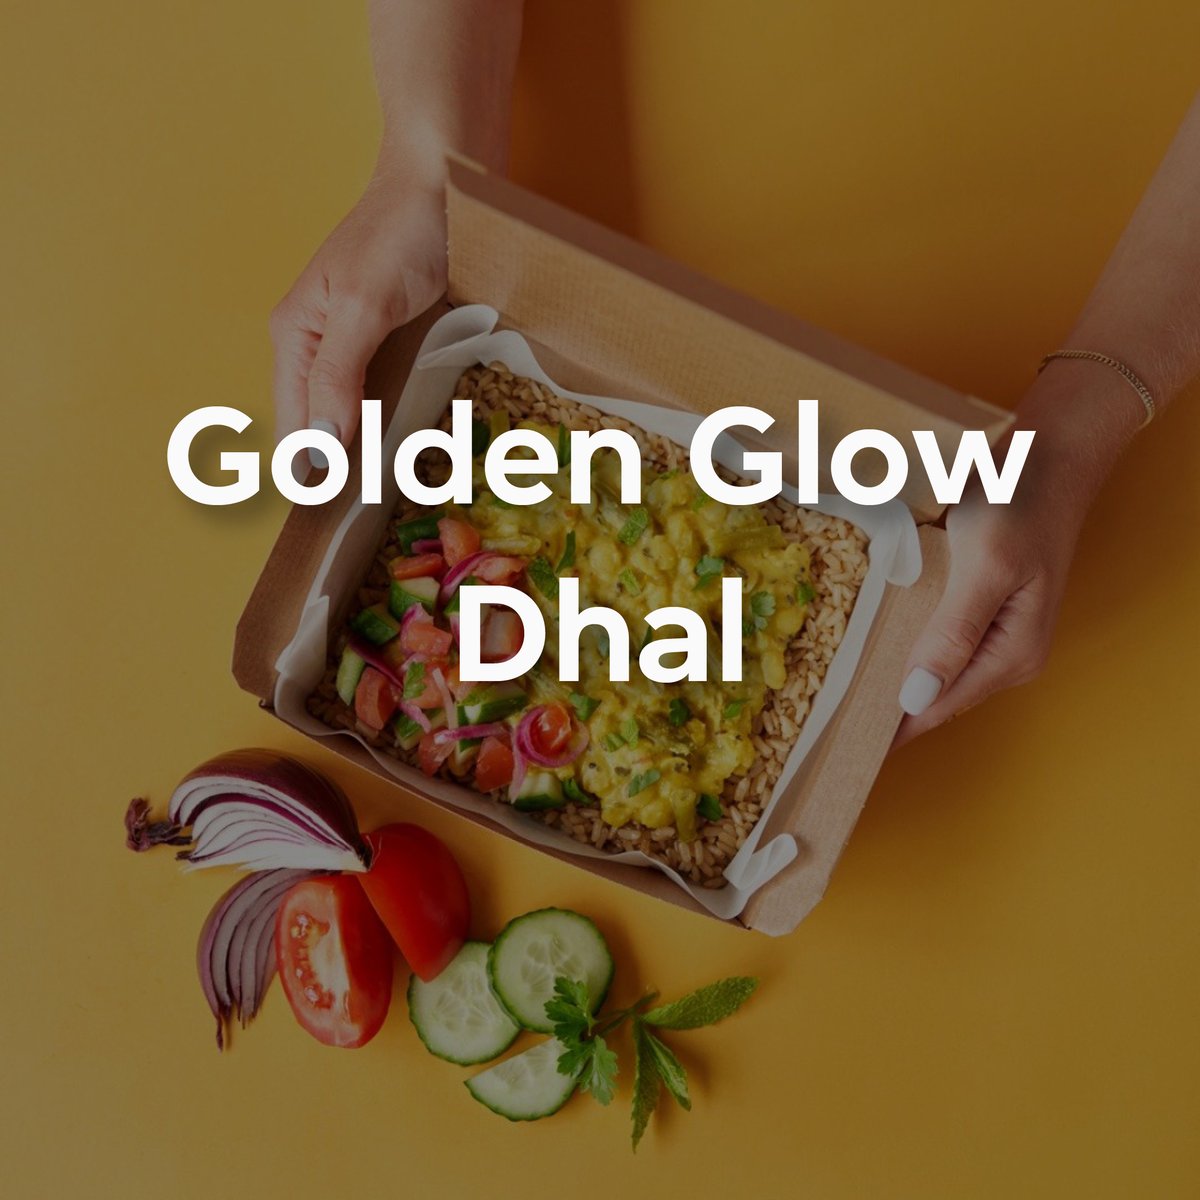 new dhal image 